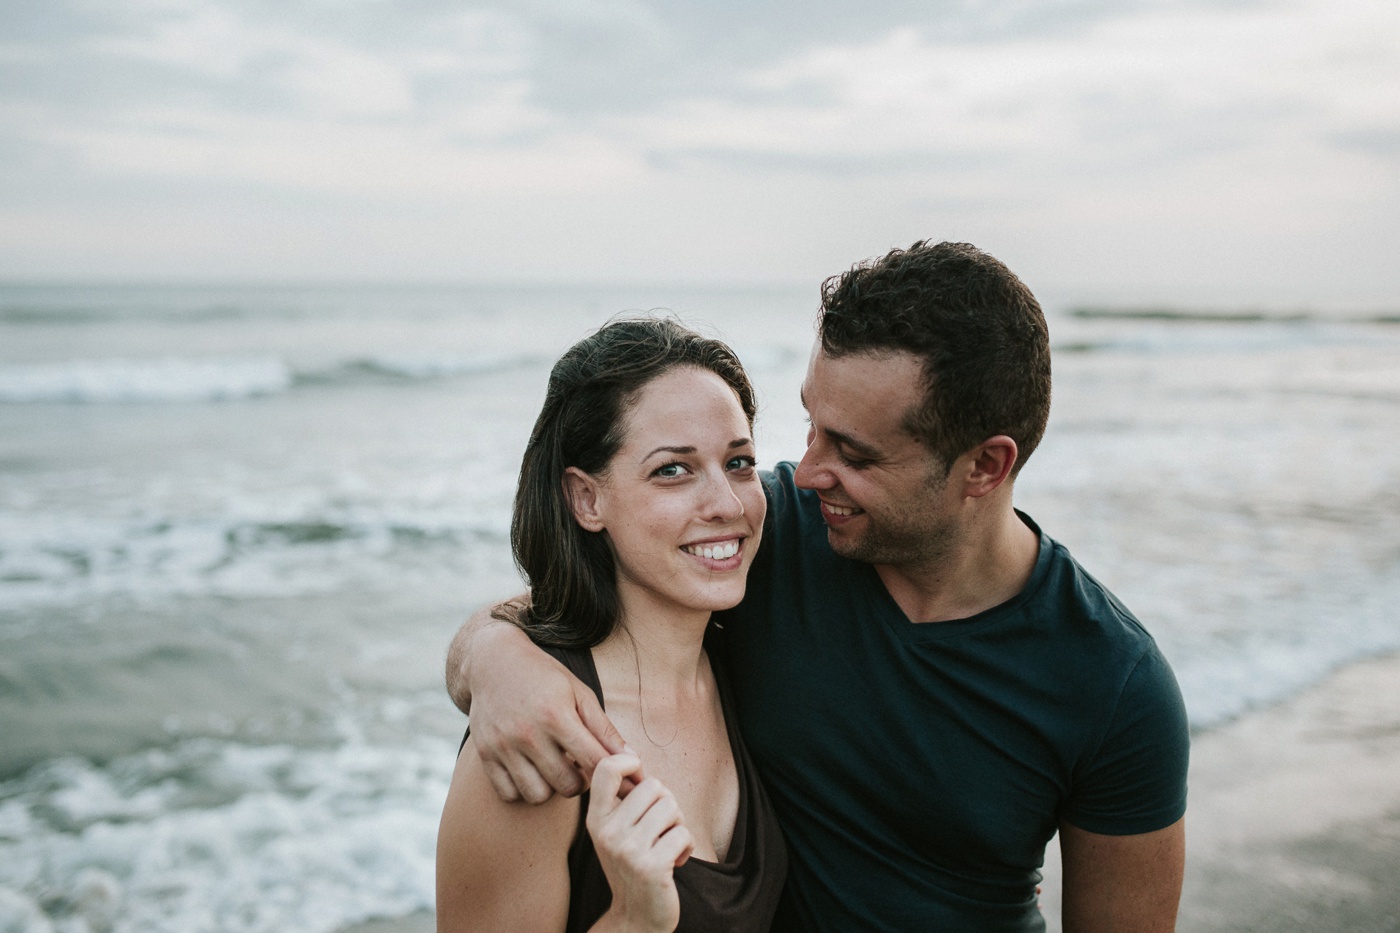 Deb-Ibs_Bali-Beach-Relaxed-Engagement-Session_Destination-Wedding-Photography_Melbourne-Wedding-Photographer_21